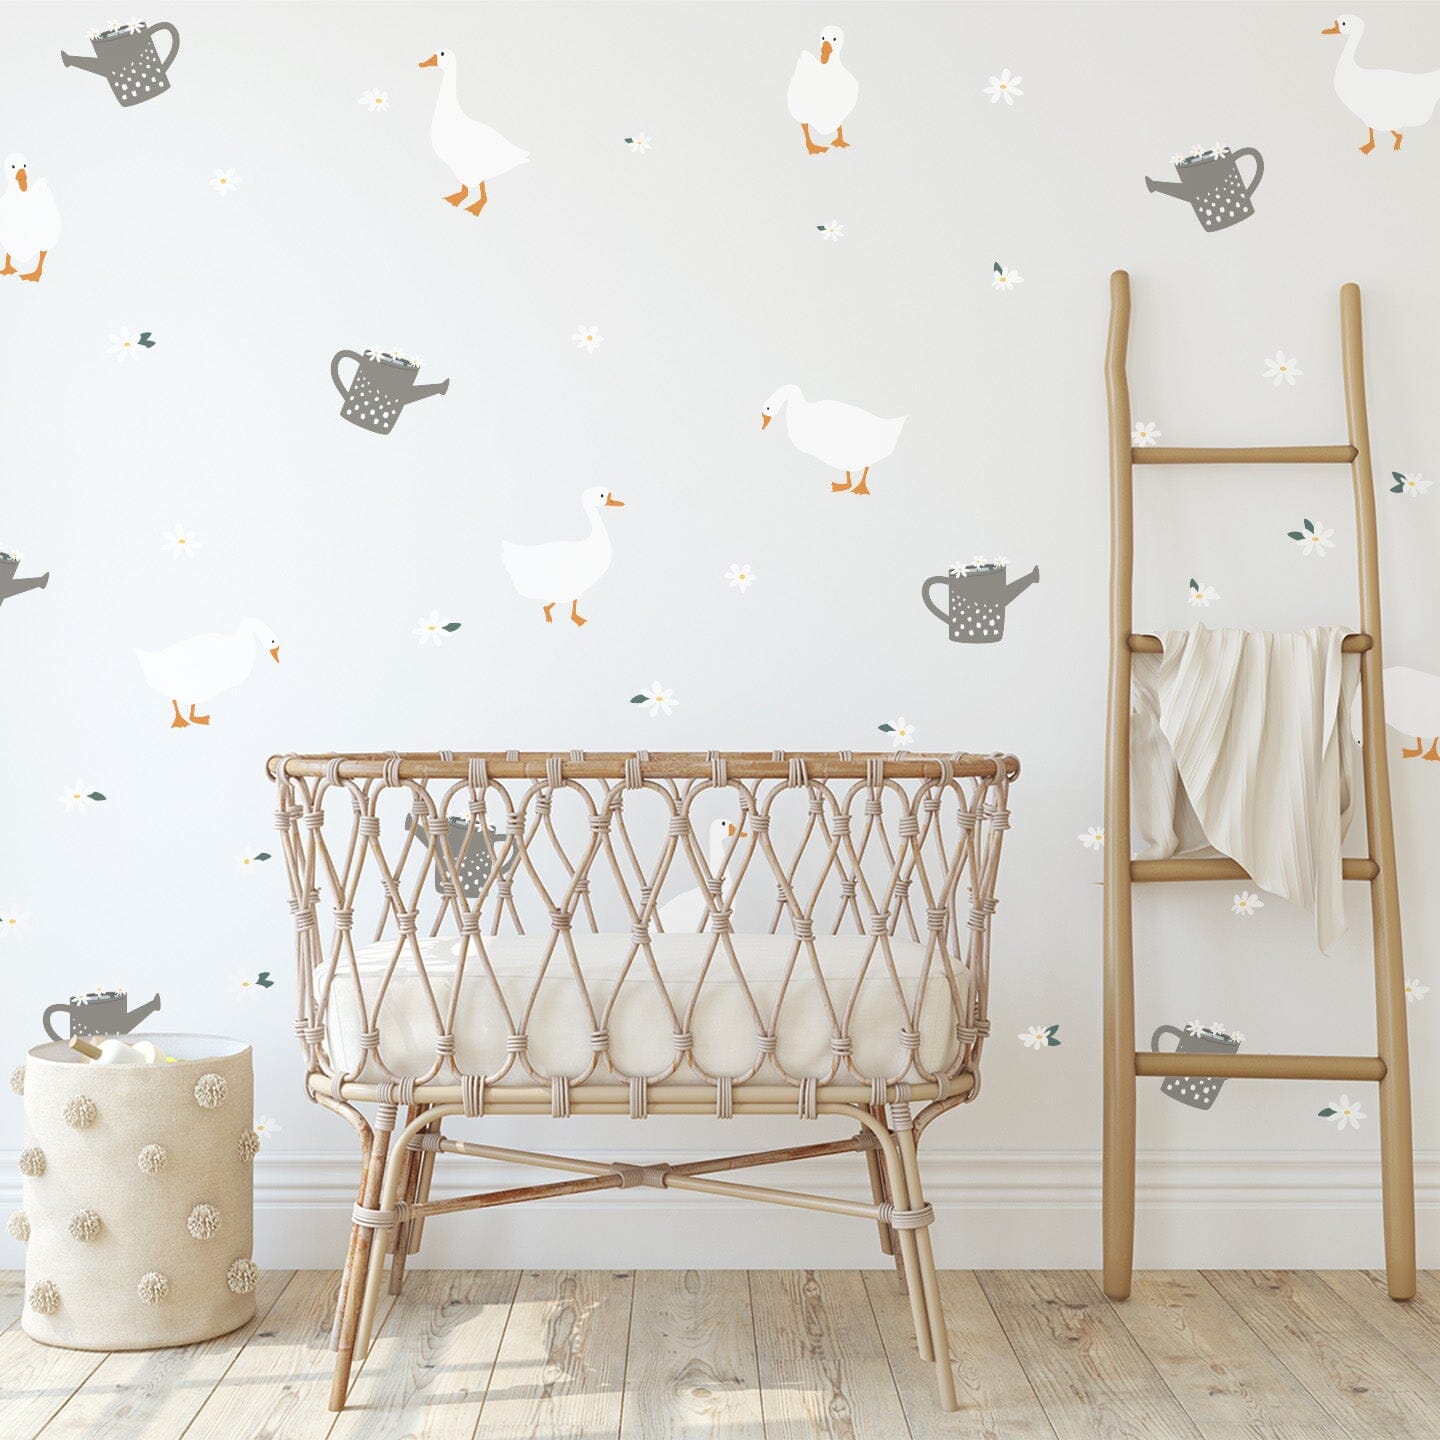 Goose Wall Decals